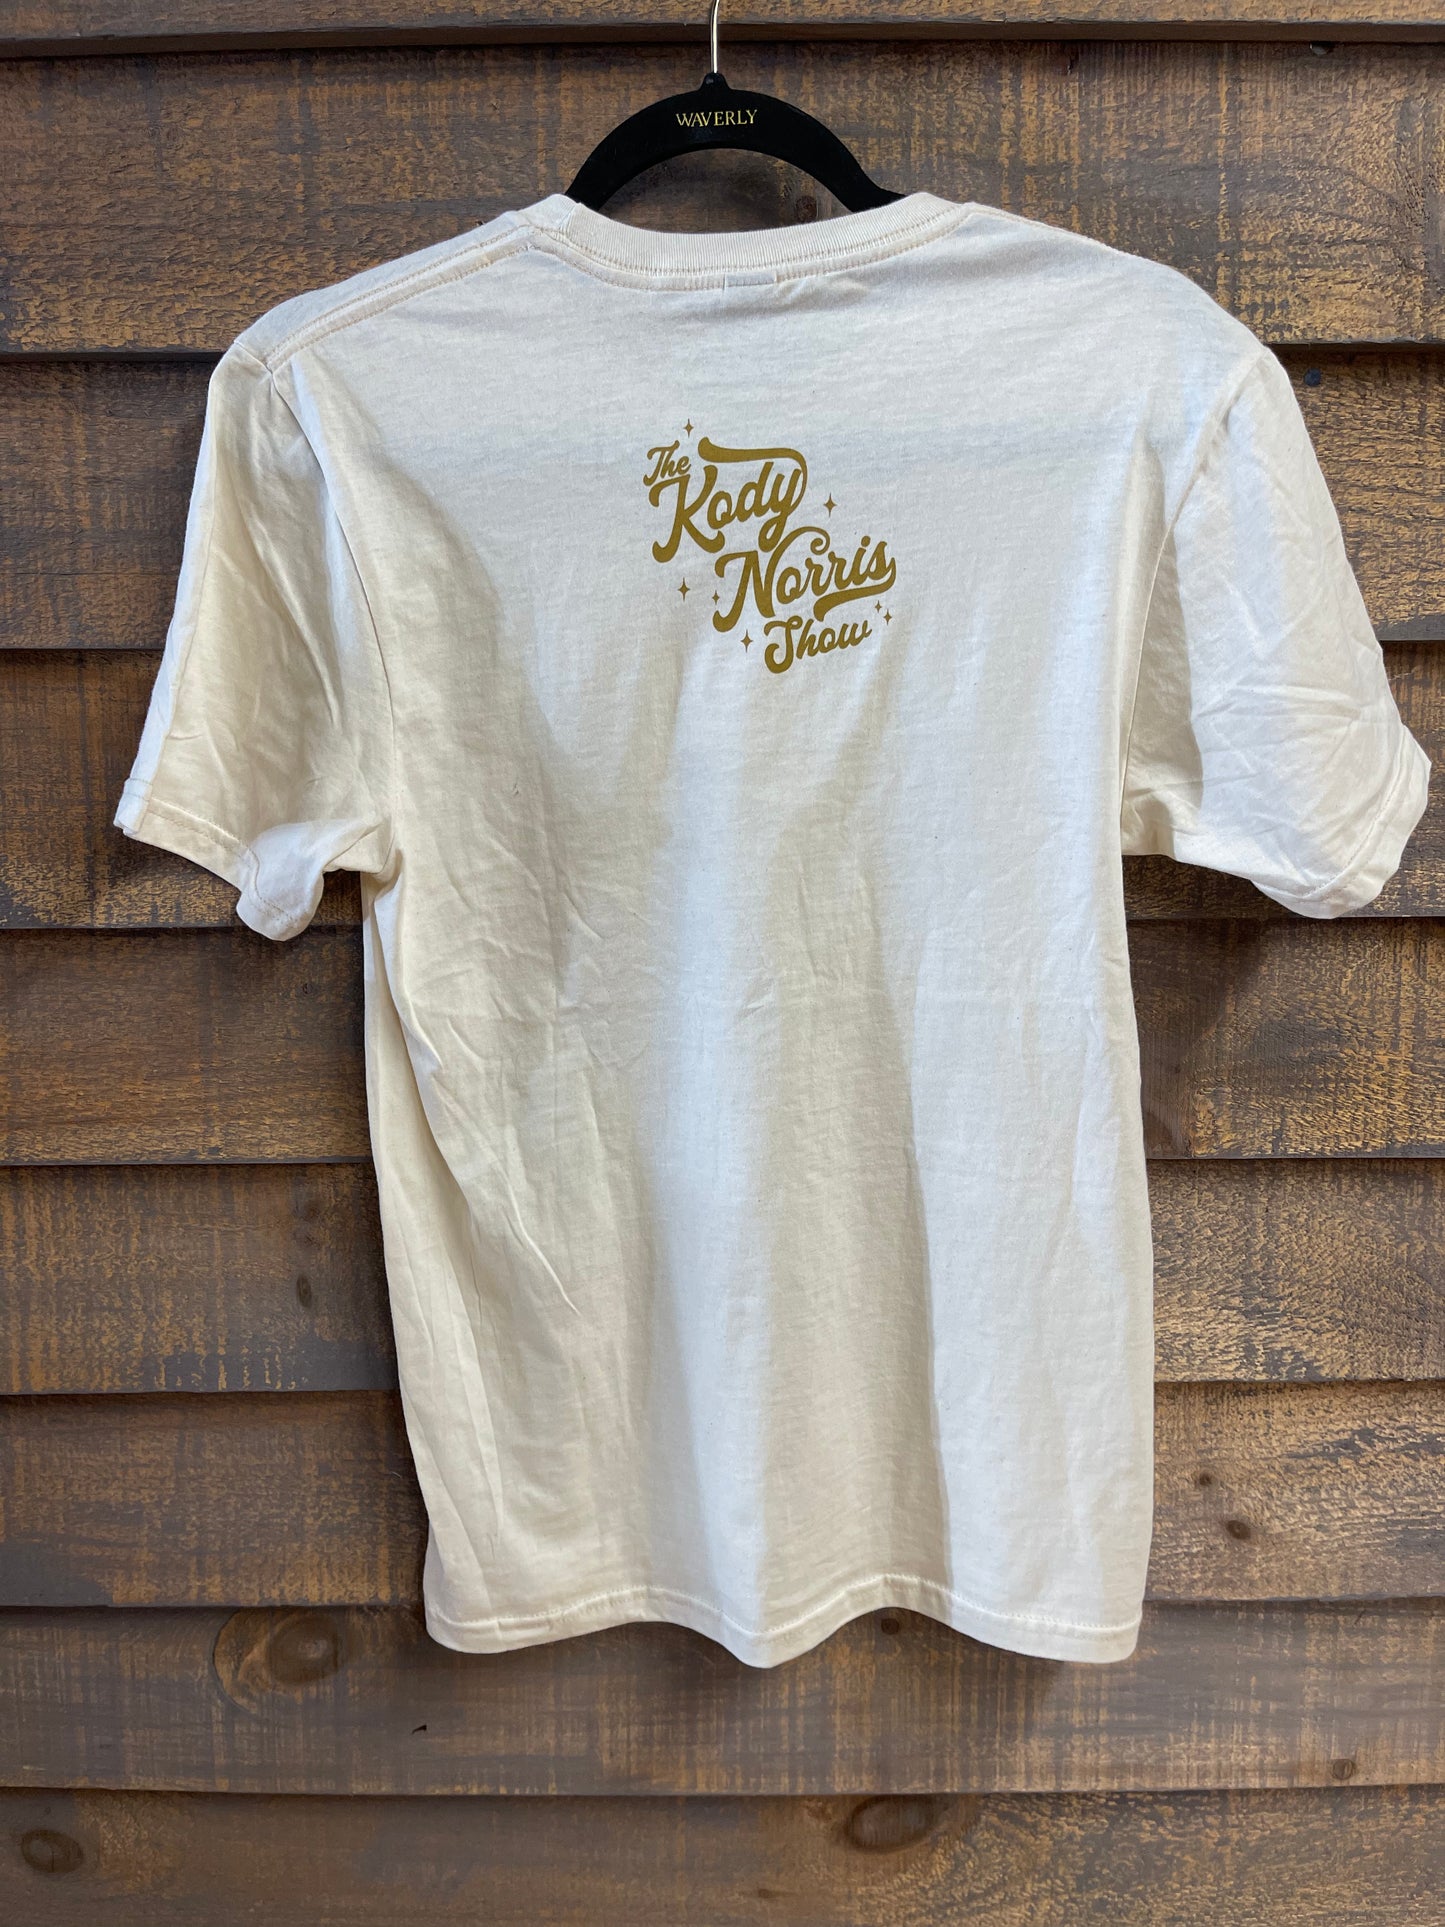 The Kody Norris Show Graphic Tee (Short Sleeve, Color Natural)